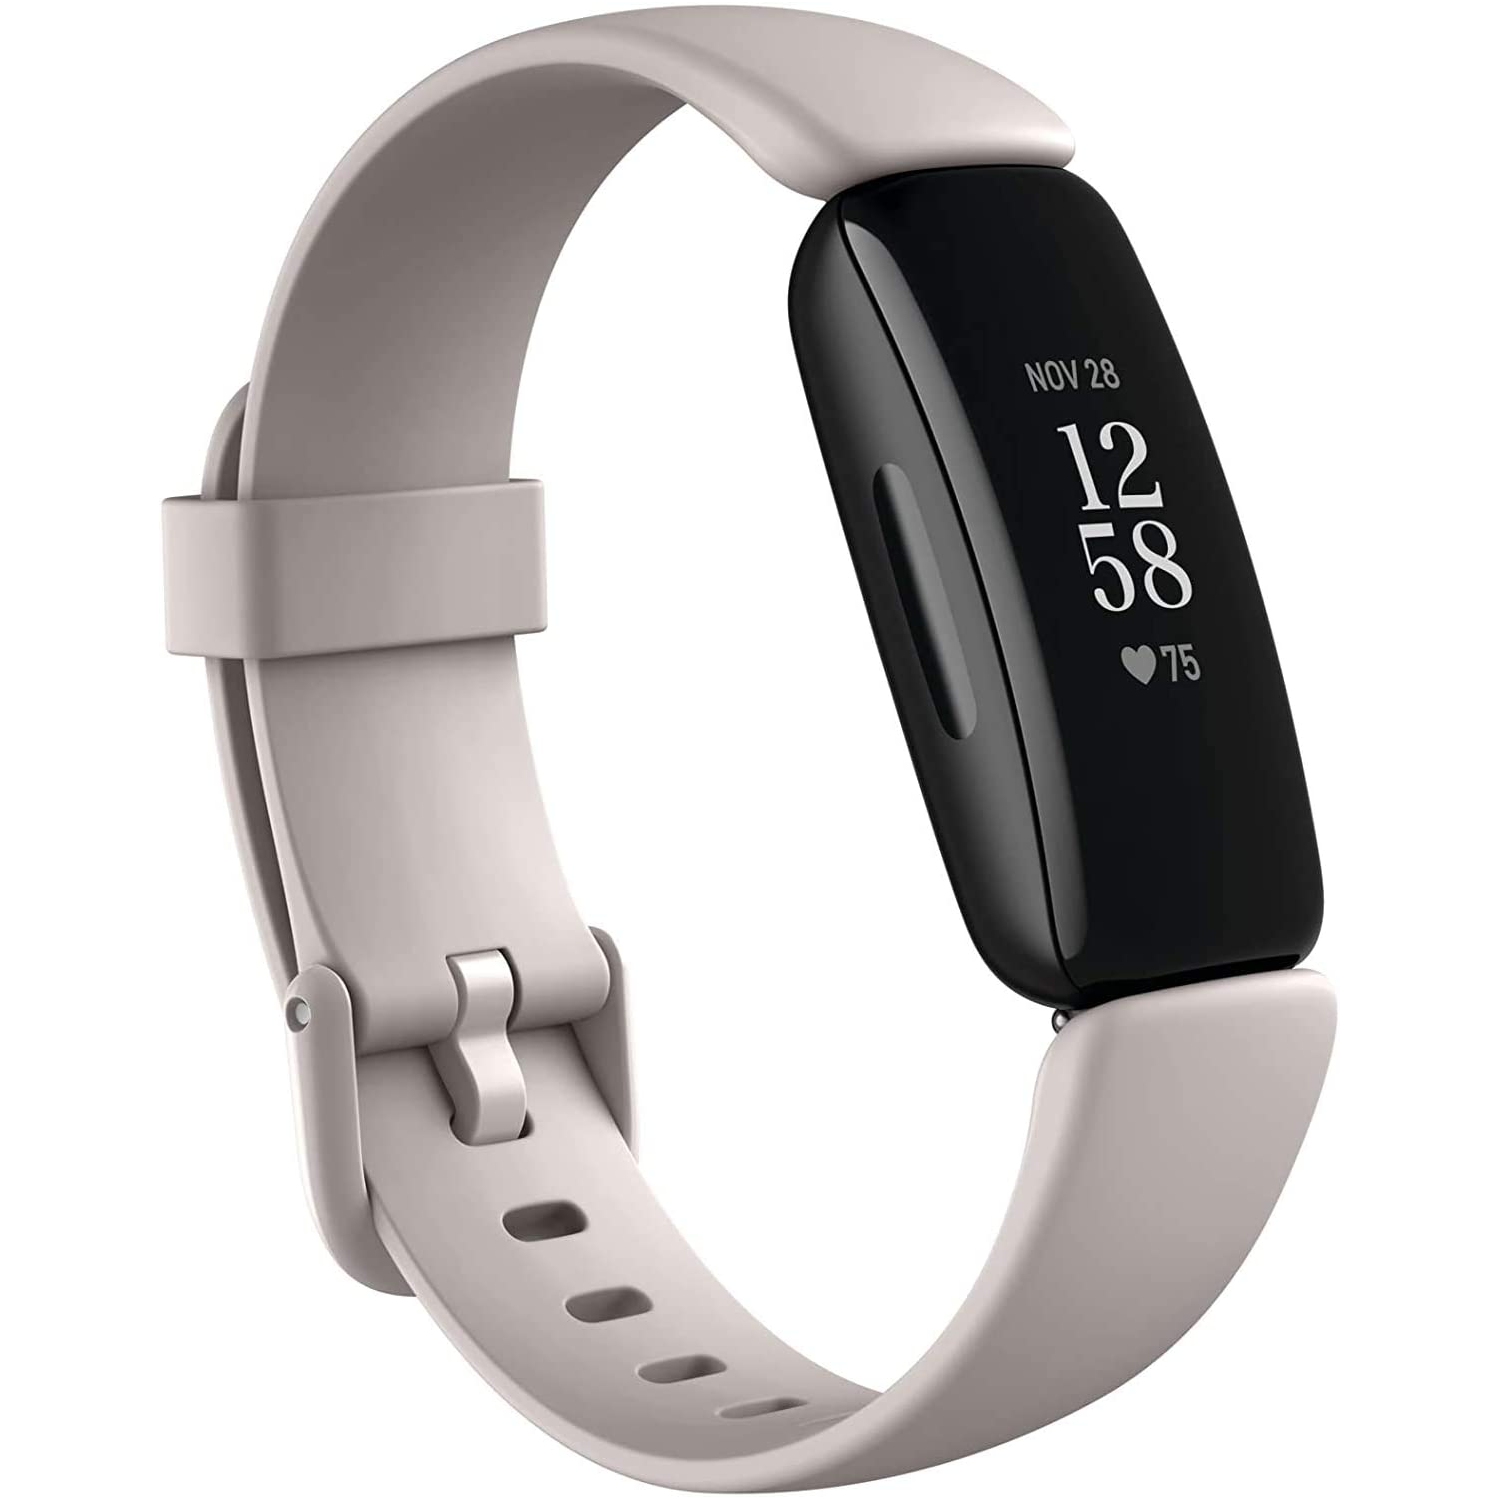 Brand NEW - Fitbit Inspire 2 Fitness Tracker with Heart Rate Monitor - Lunar White/black